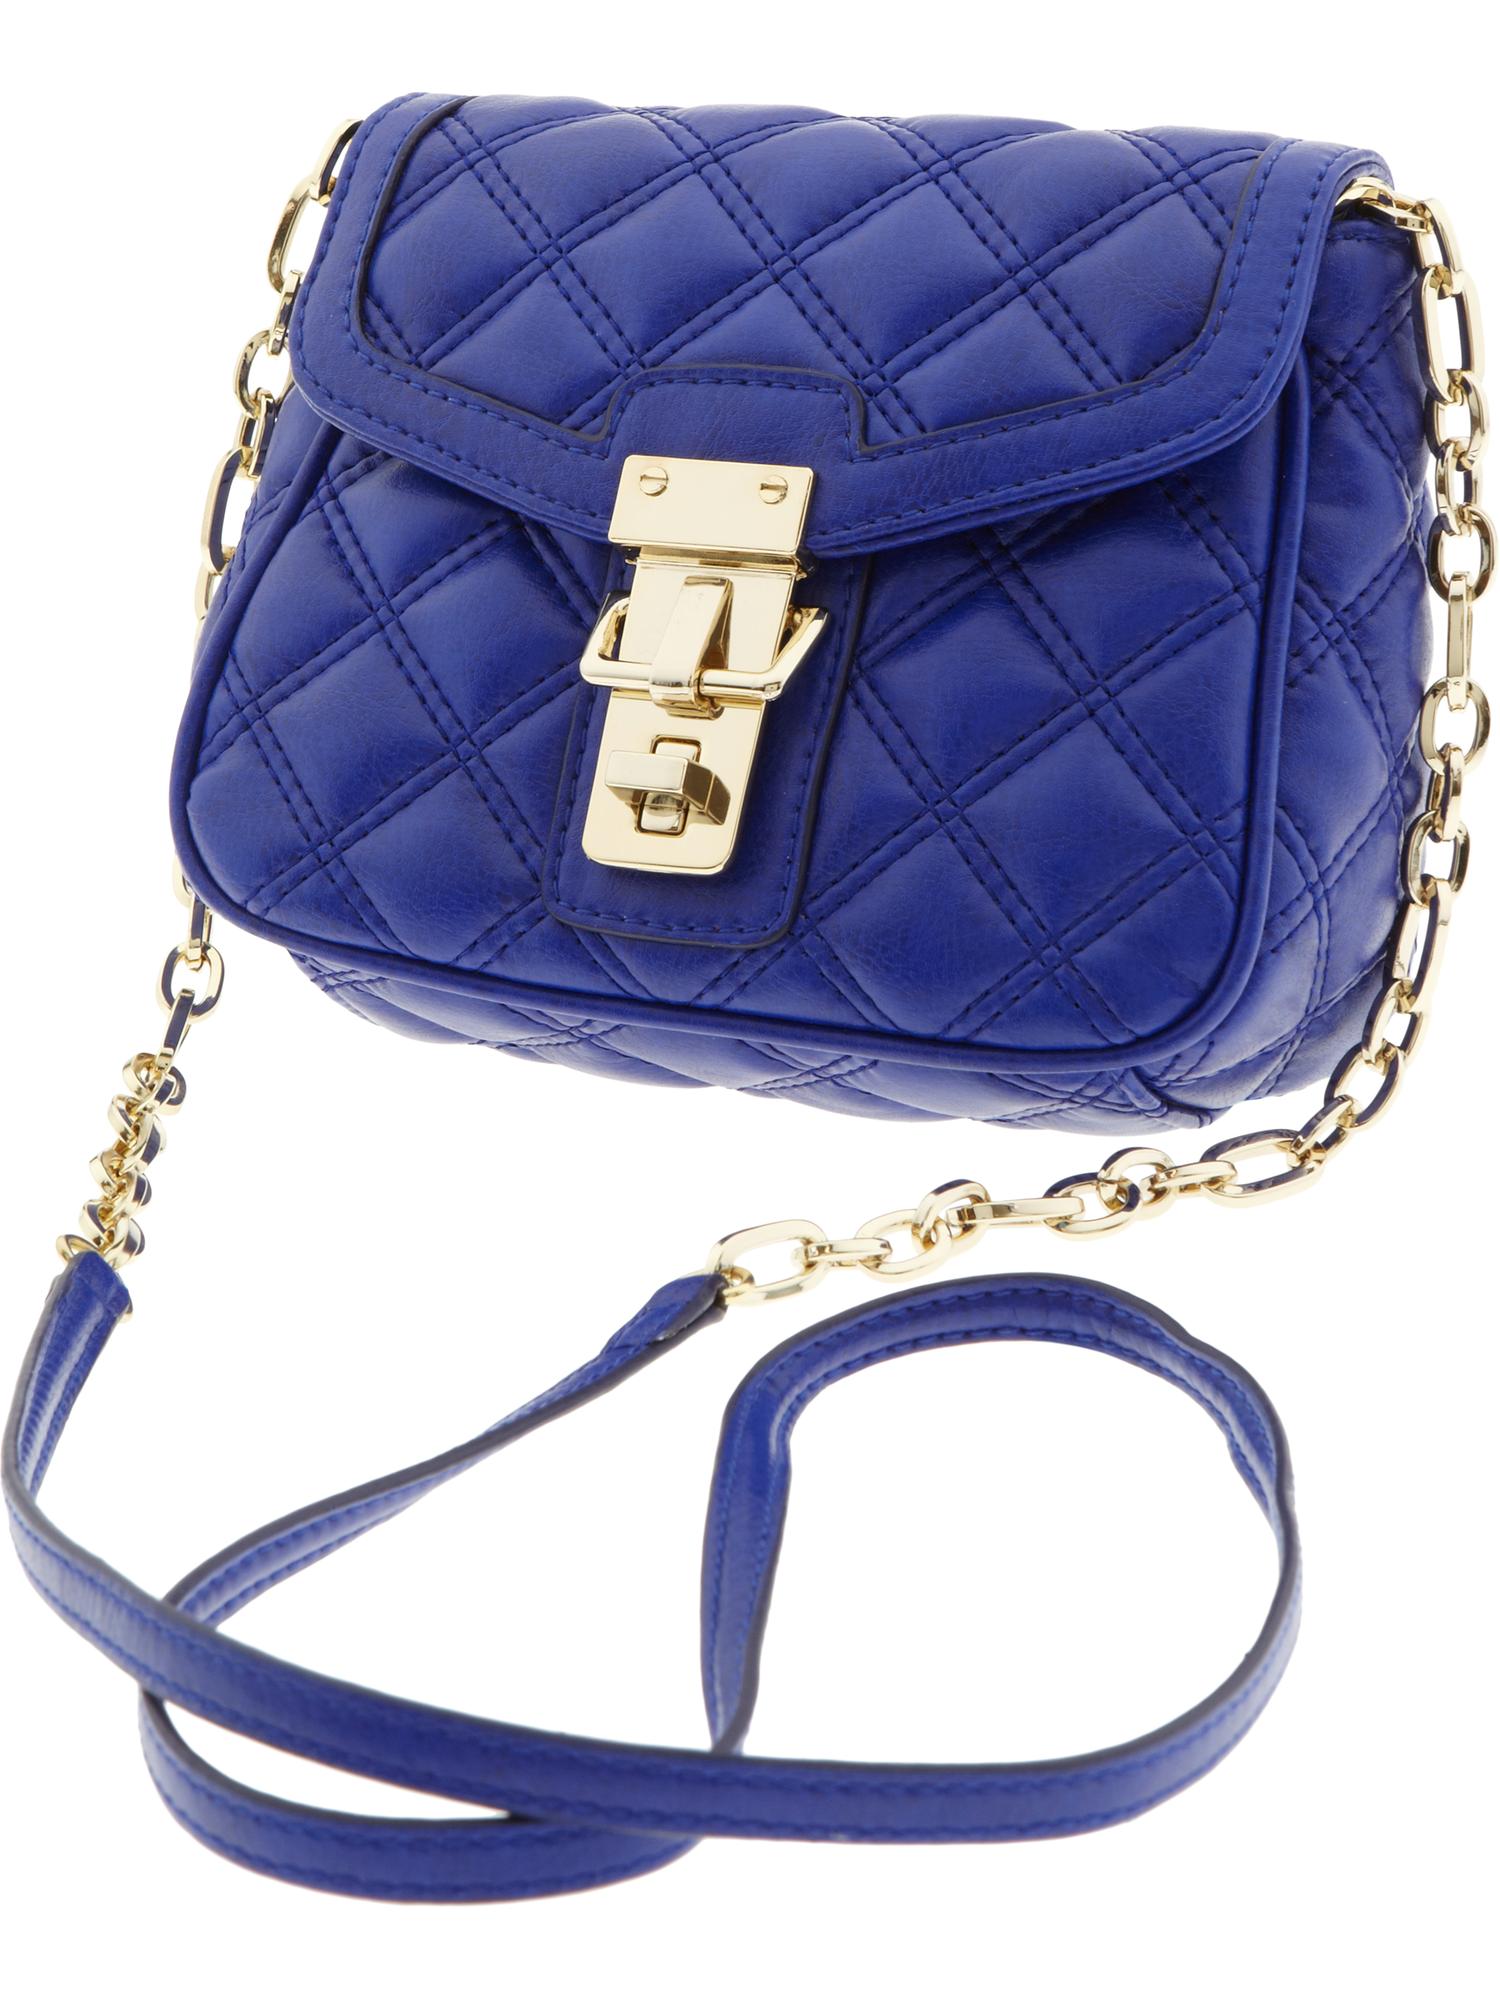 Quilted faux-leather cross-body